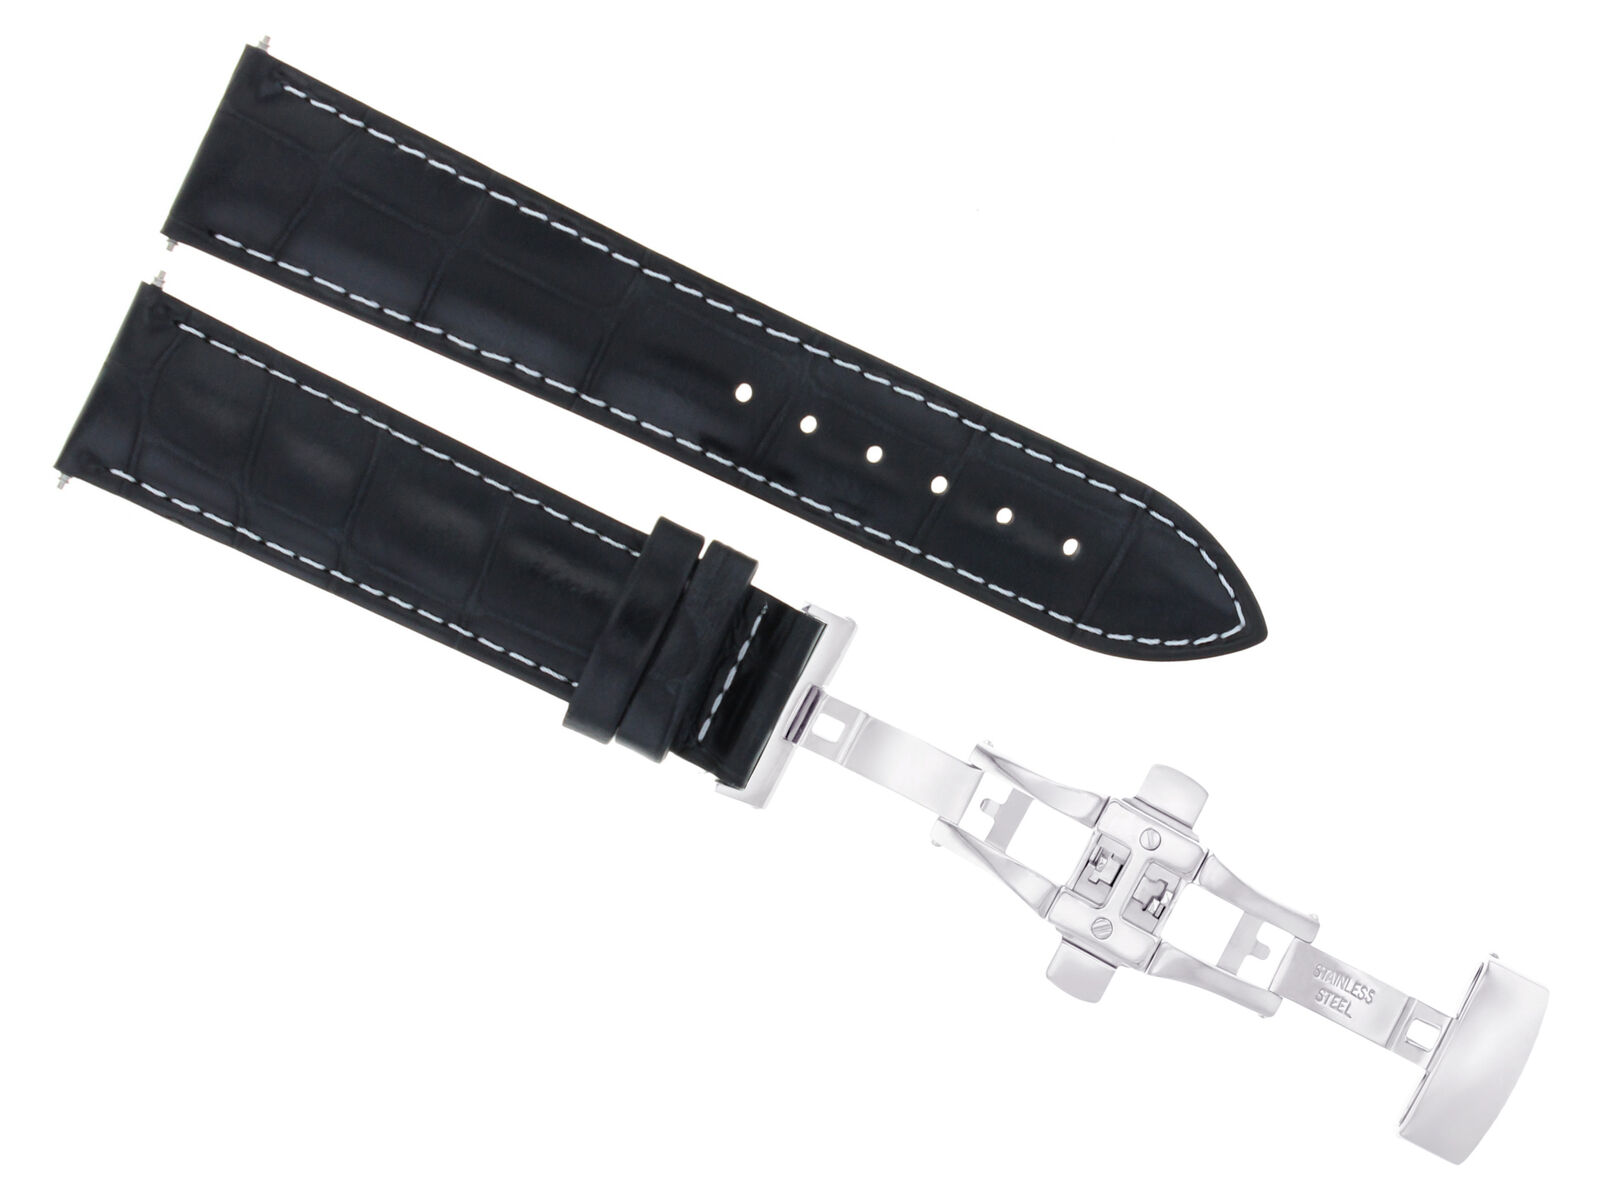 19MM LEATHER WATCH STRAP BAND FOR VACHERON CONSTANTIN WATCH BLACK WS